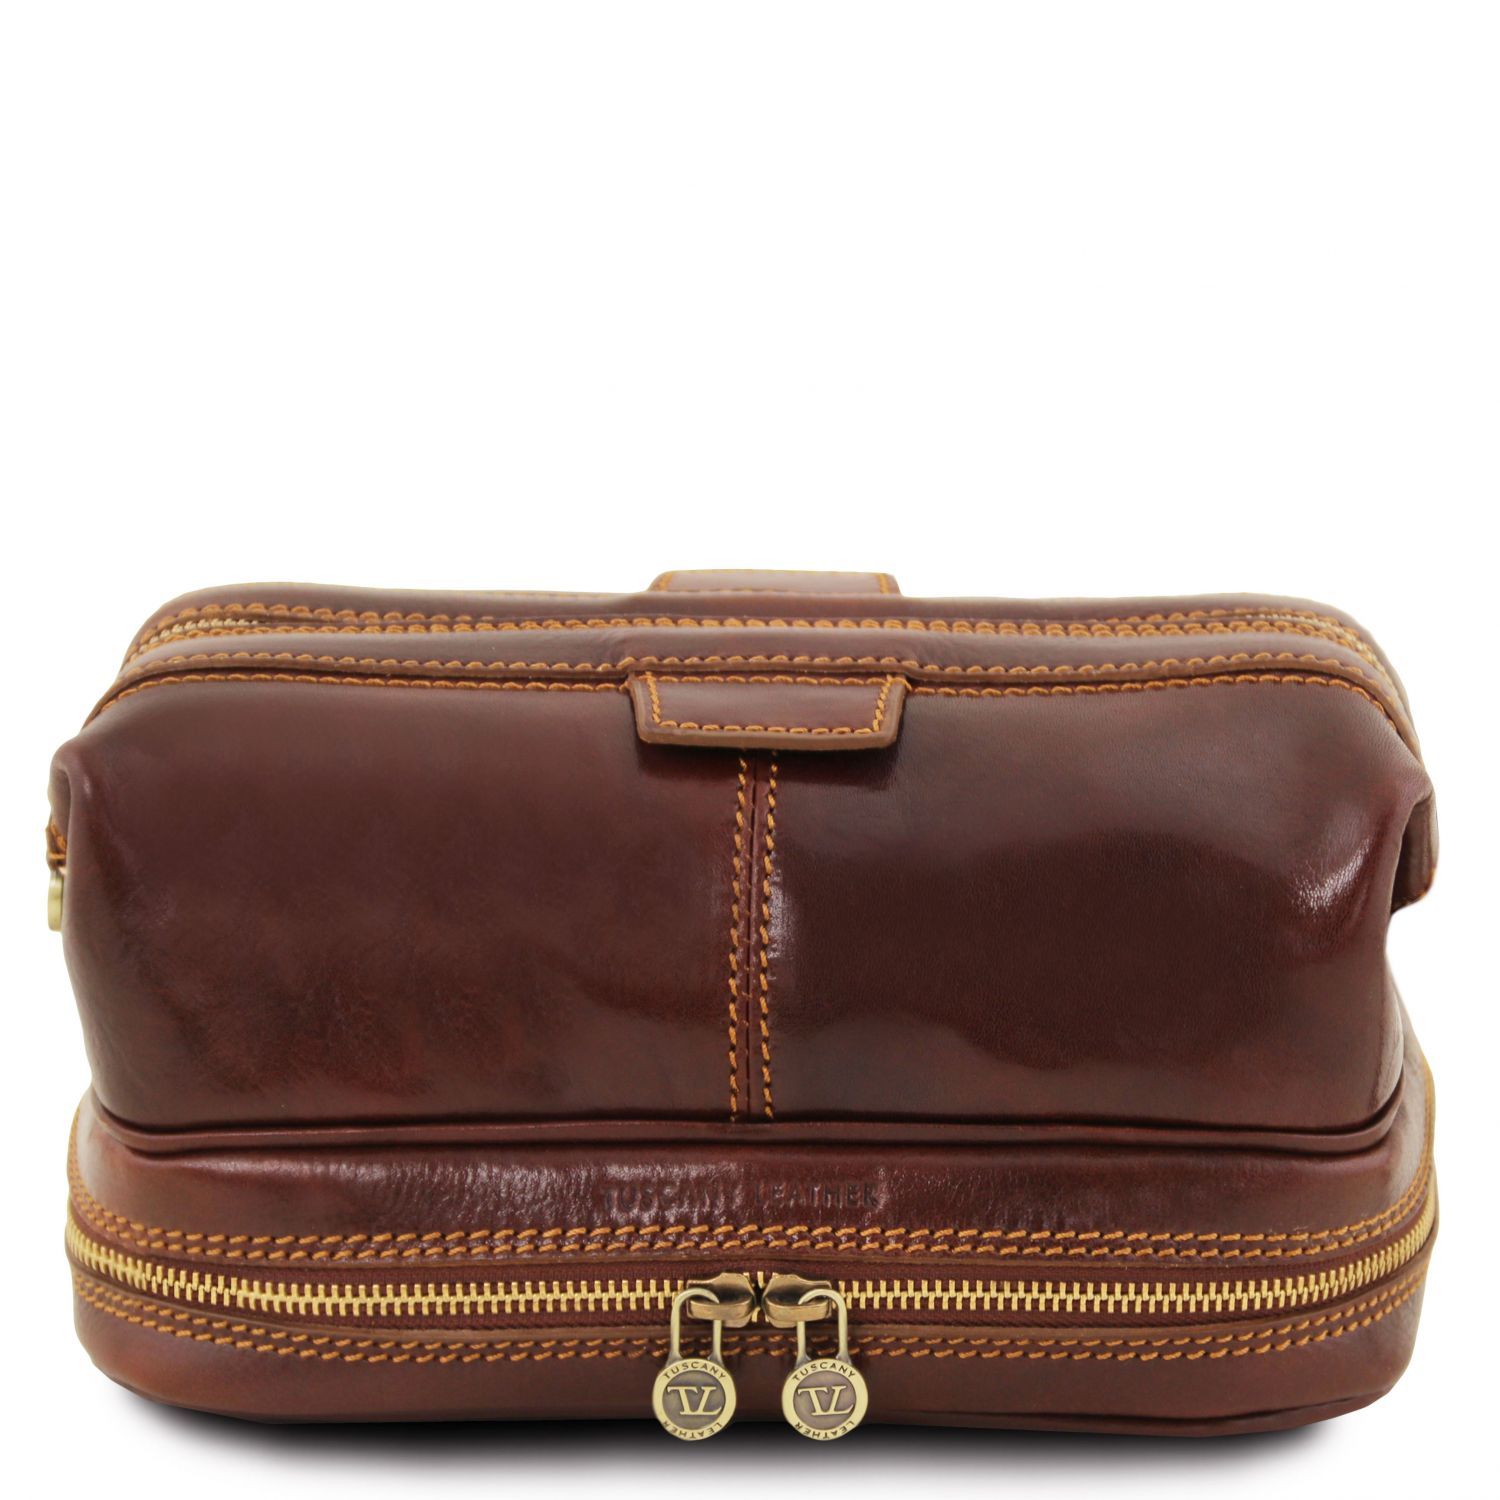 Leather Toiletry Bag - Patrick